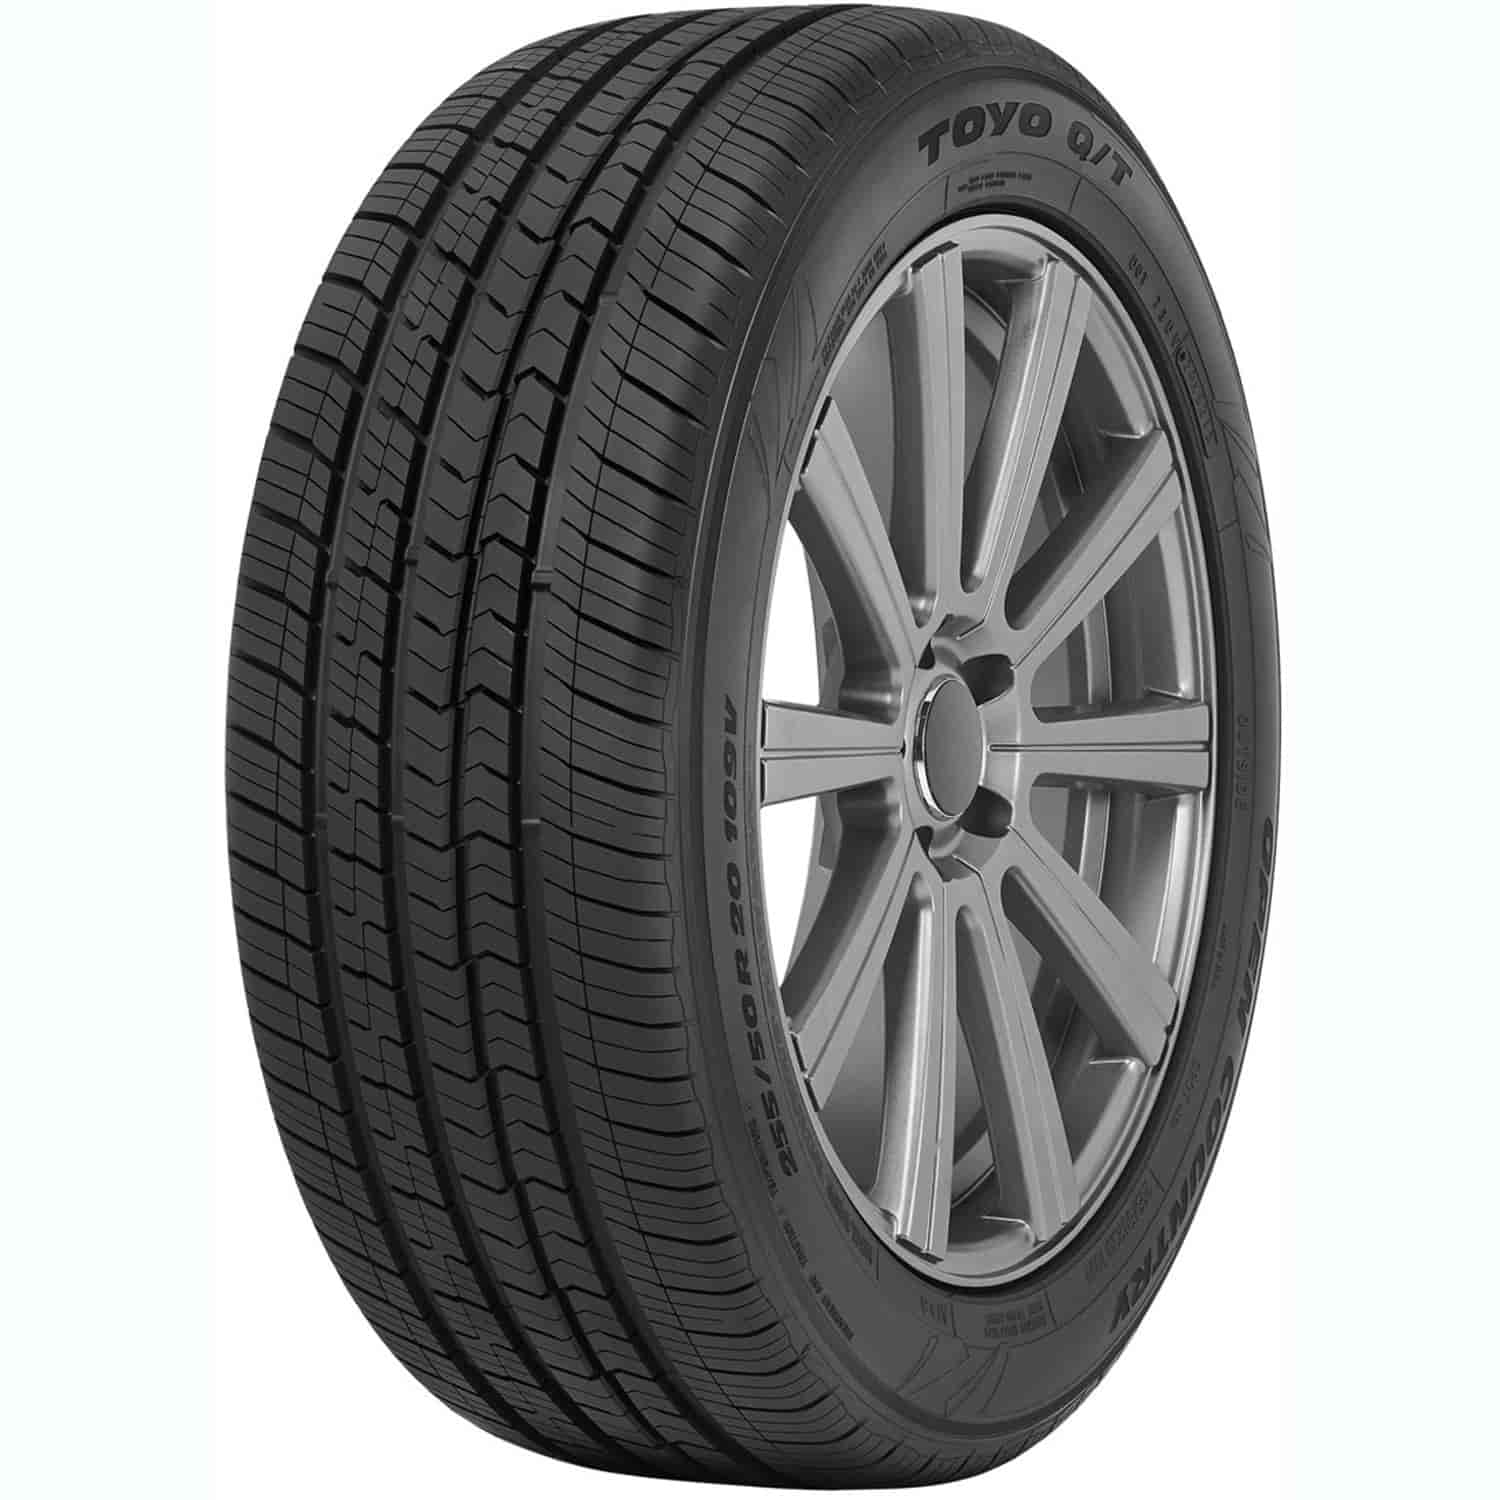 OPEN COUNTRY Q/T P245/50R20 102V